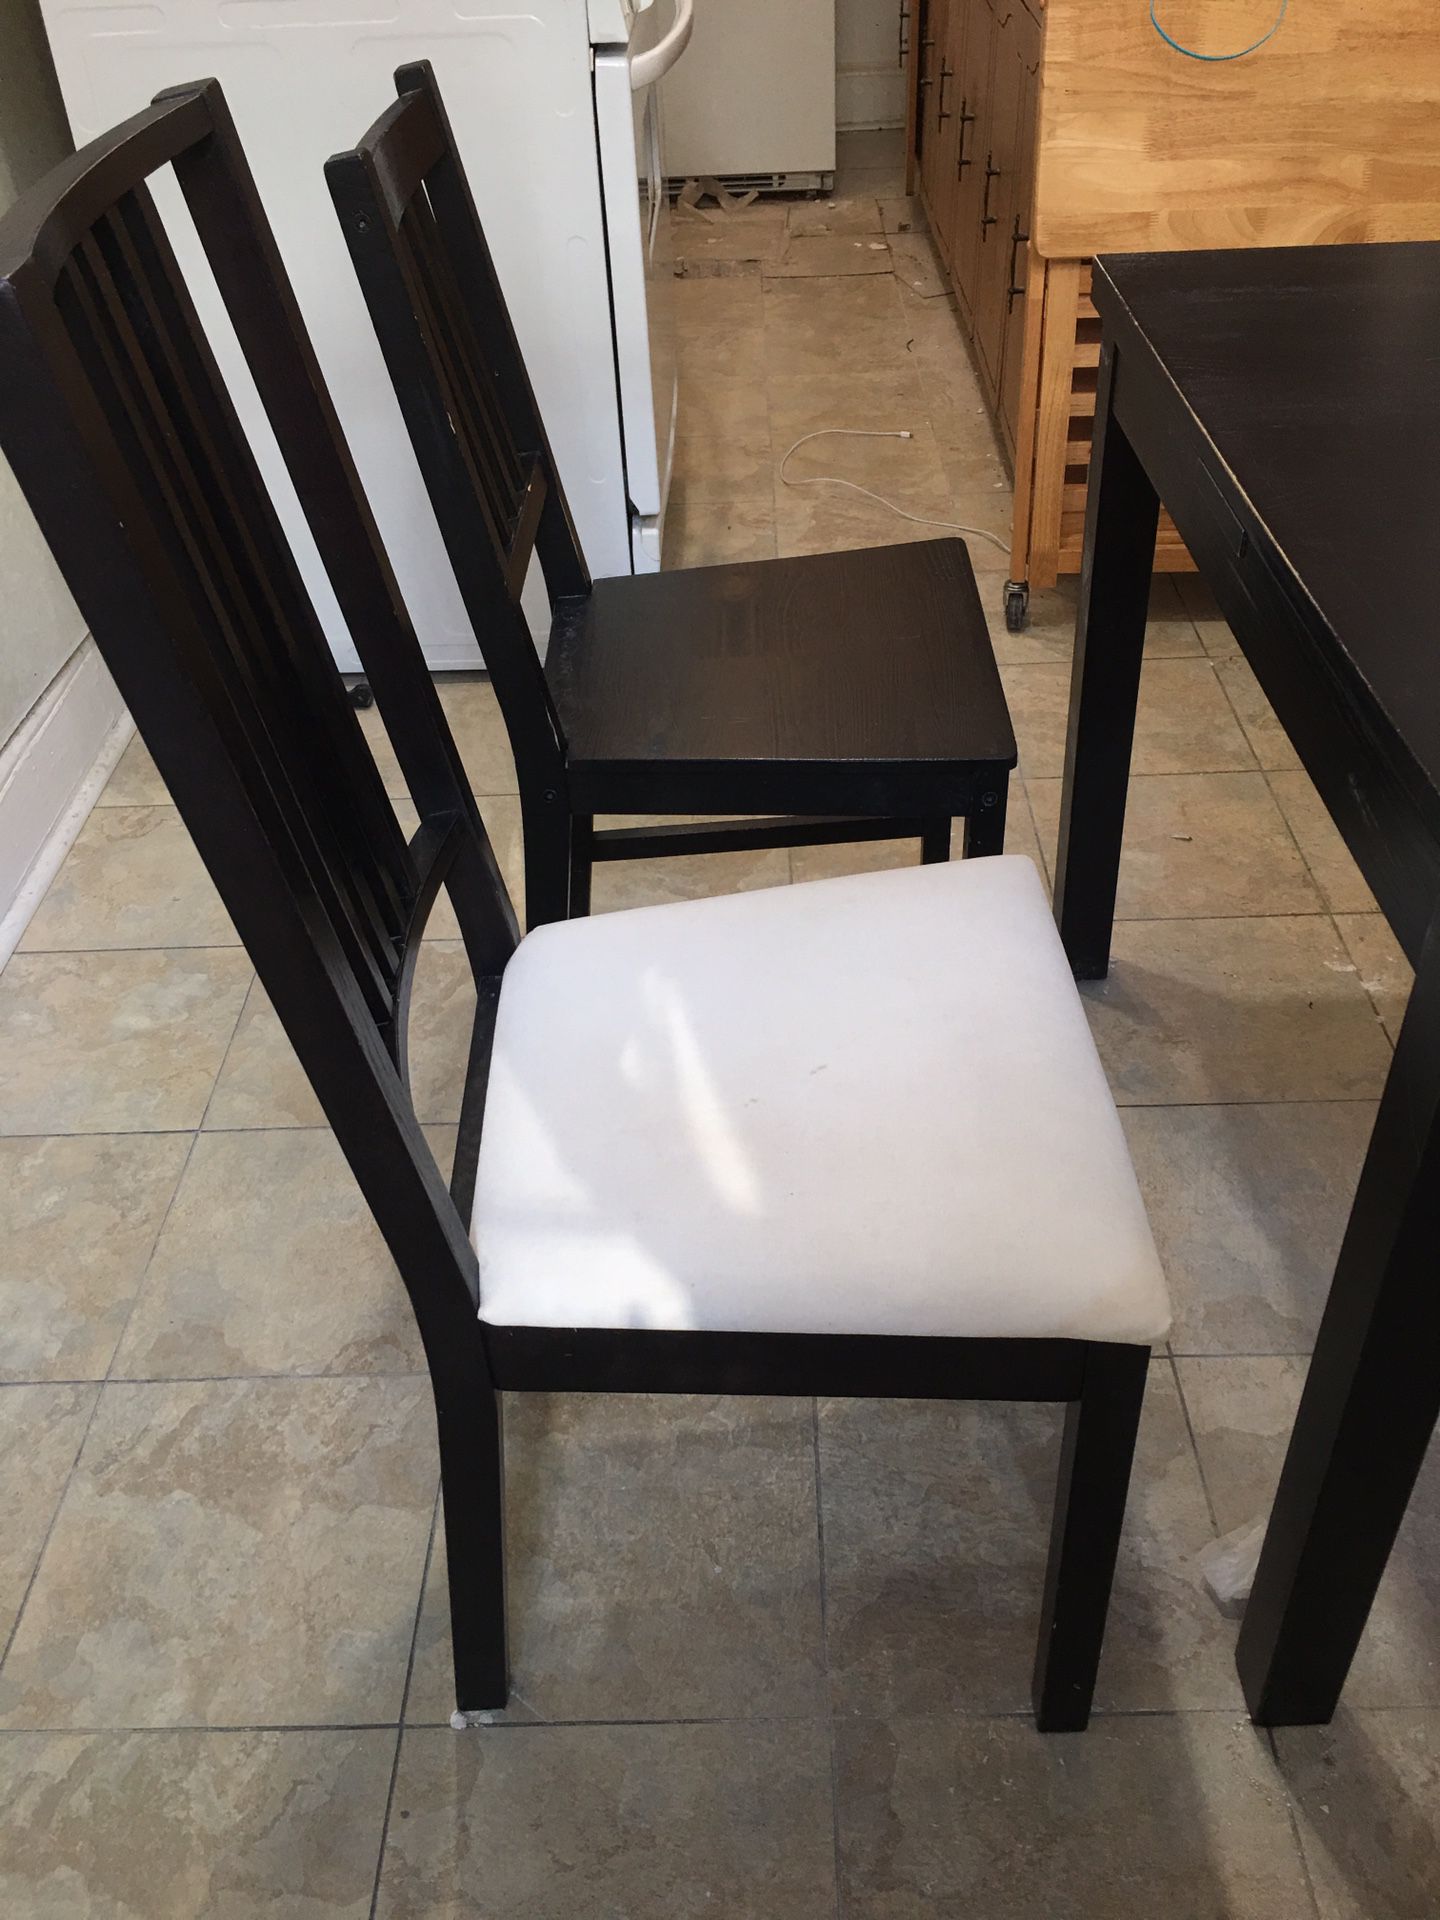 Kitchen/dinner table set with chairs (optional)